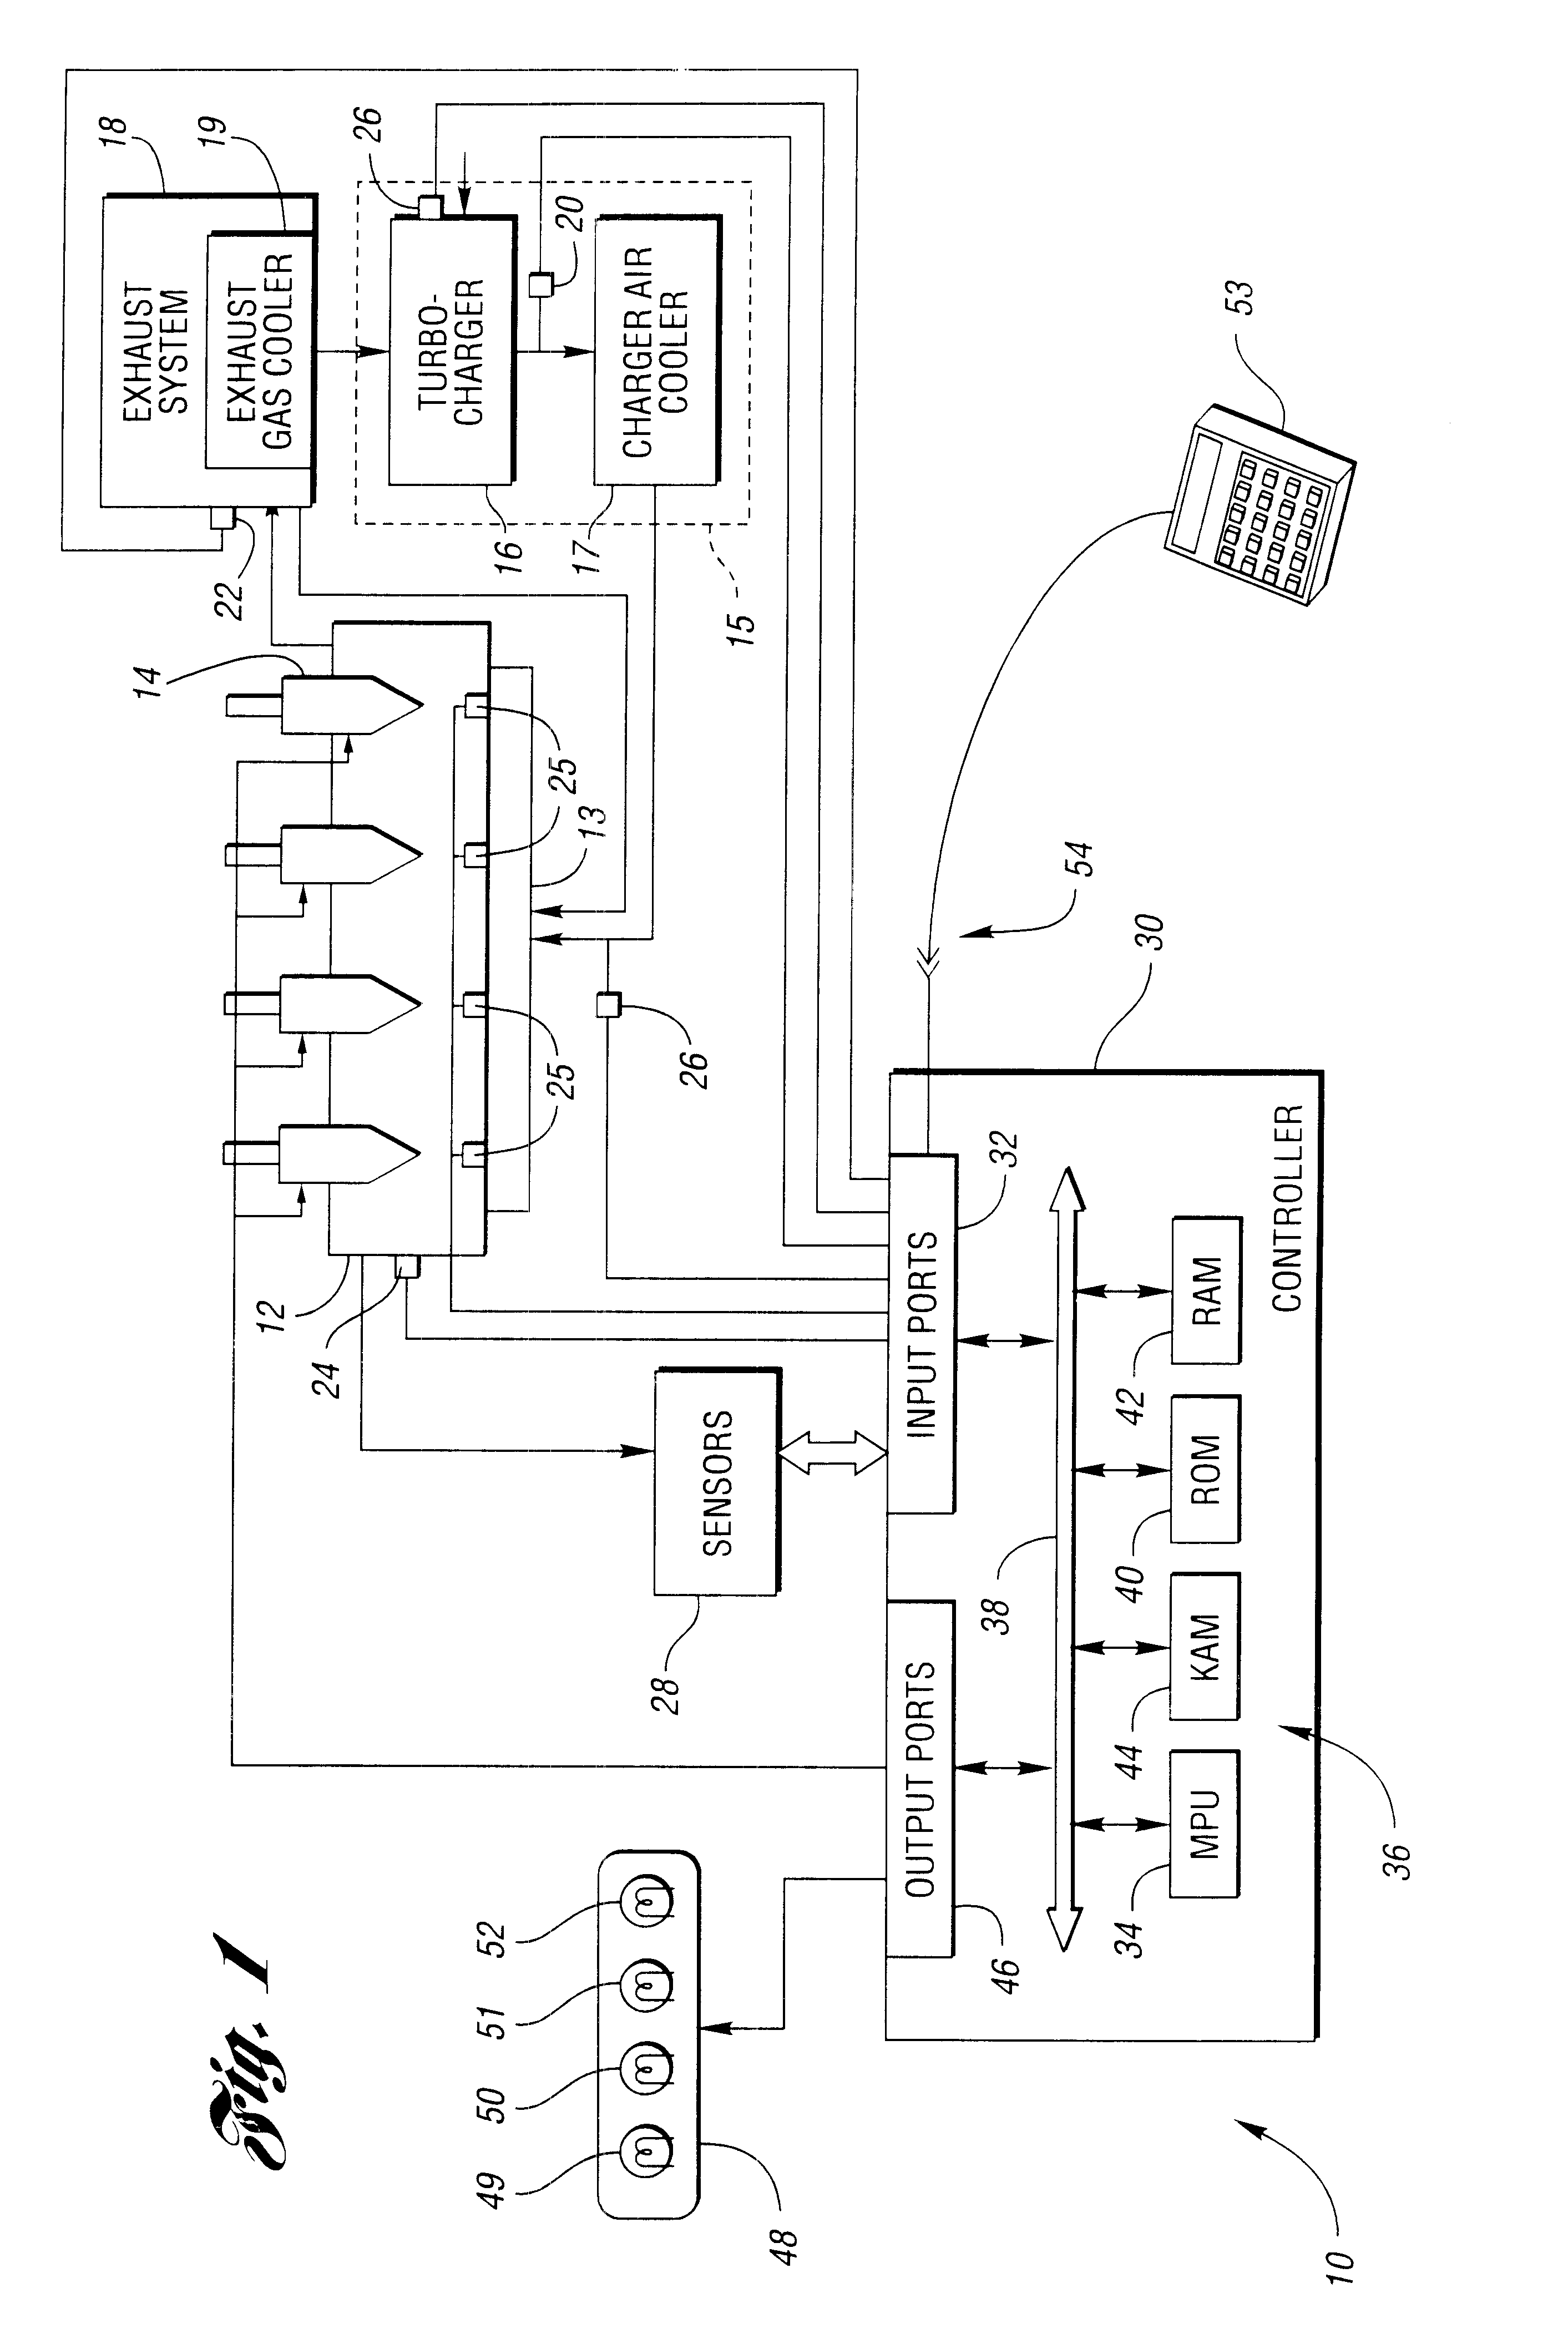 Method and system for enhanced engine control based on exhaust temperature